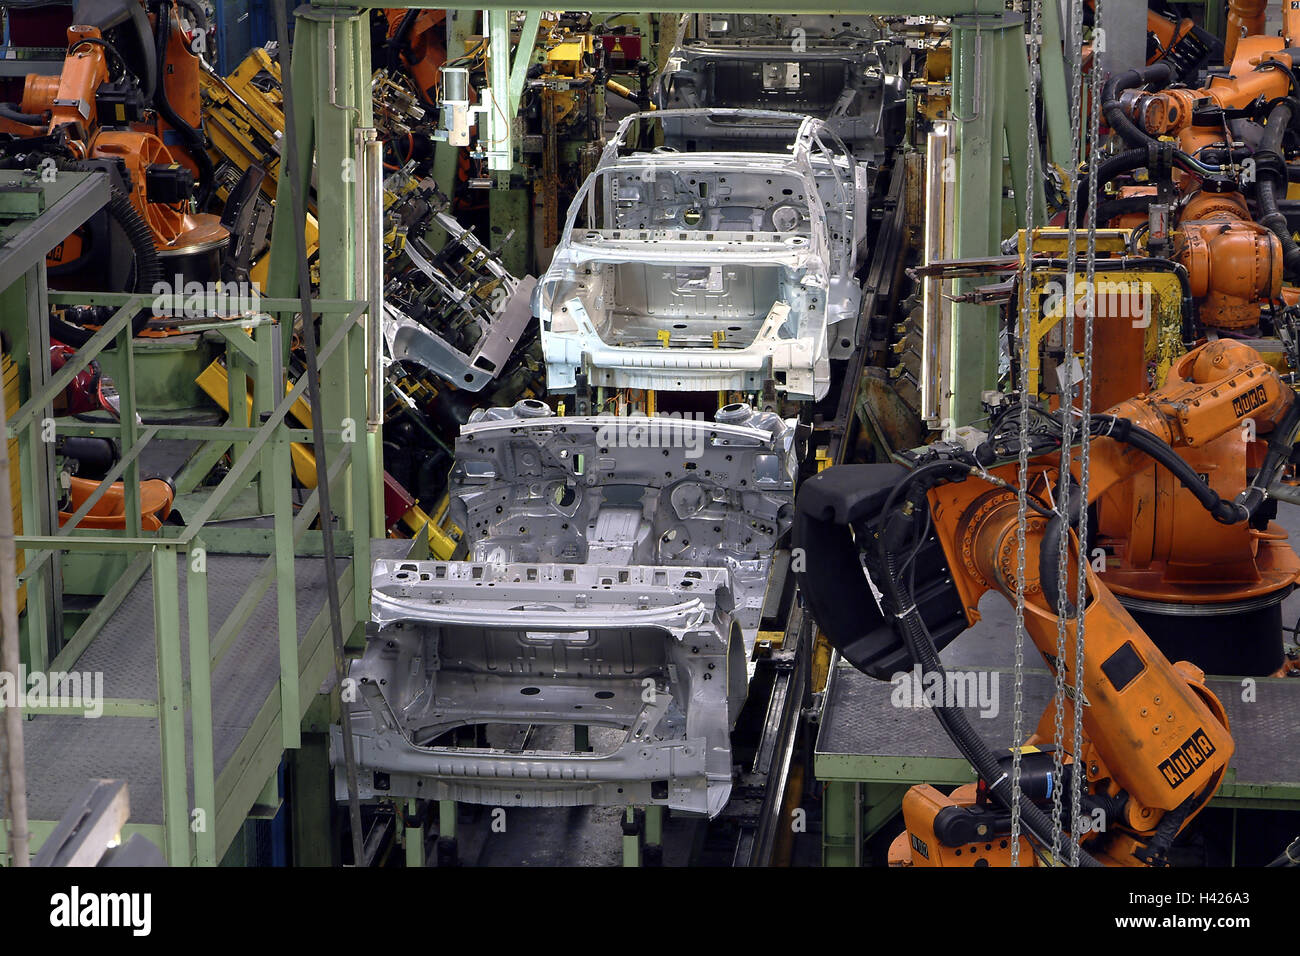 DaimlerChrysler opus, Mercedes production, editing line, bodies in white, welding bots economy, industry, automobile industry, factory, opus hall, cars, Pkw's, vehicles, Mercedes, S-Class, production line, car bodies, bots, robots, weld, computerizedly, p Stock Photo